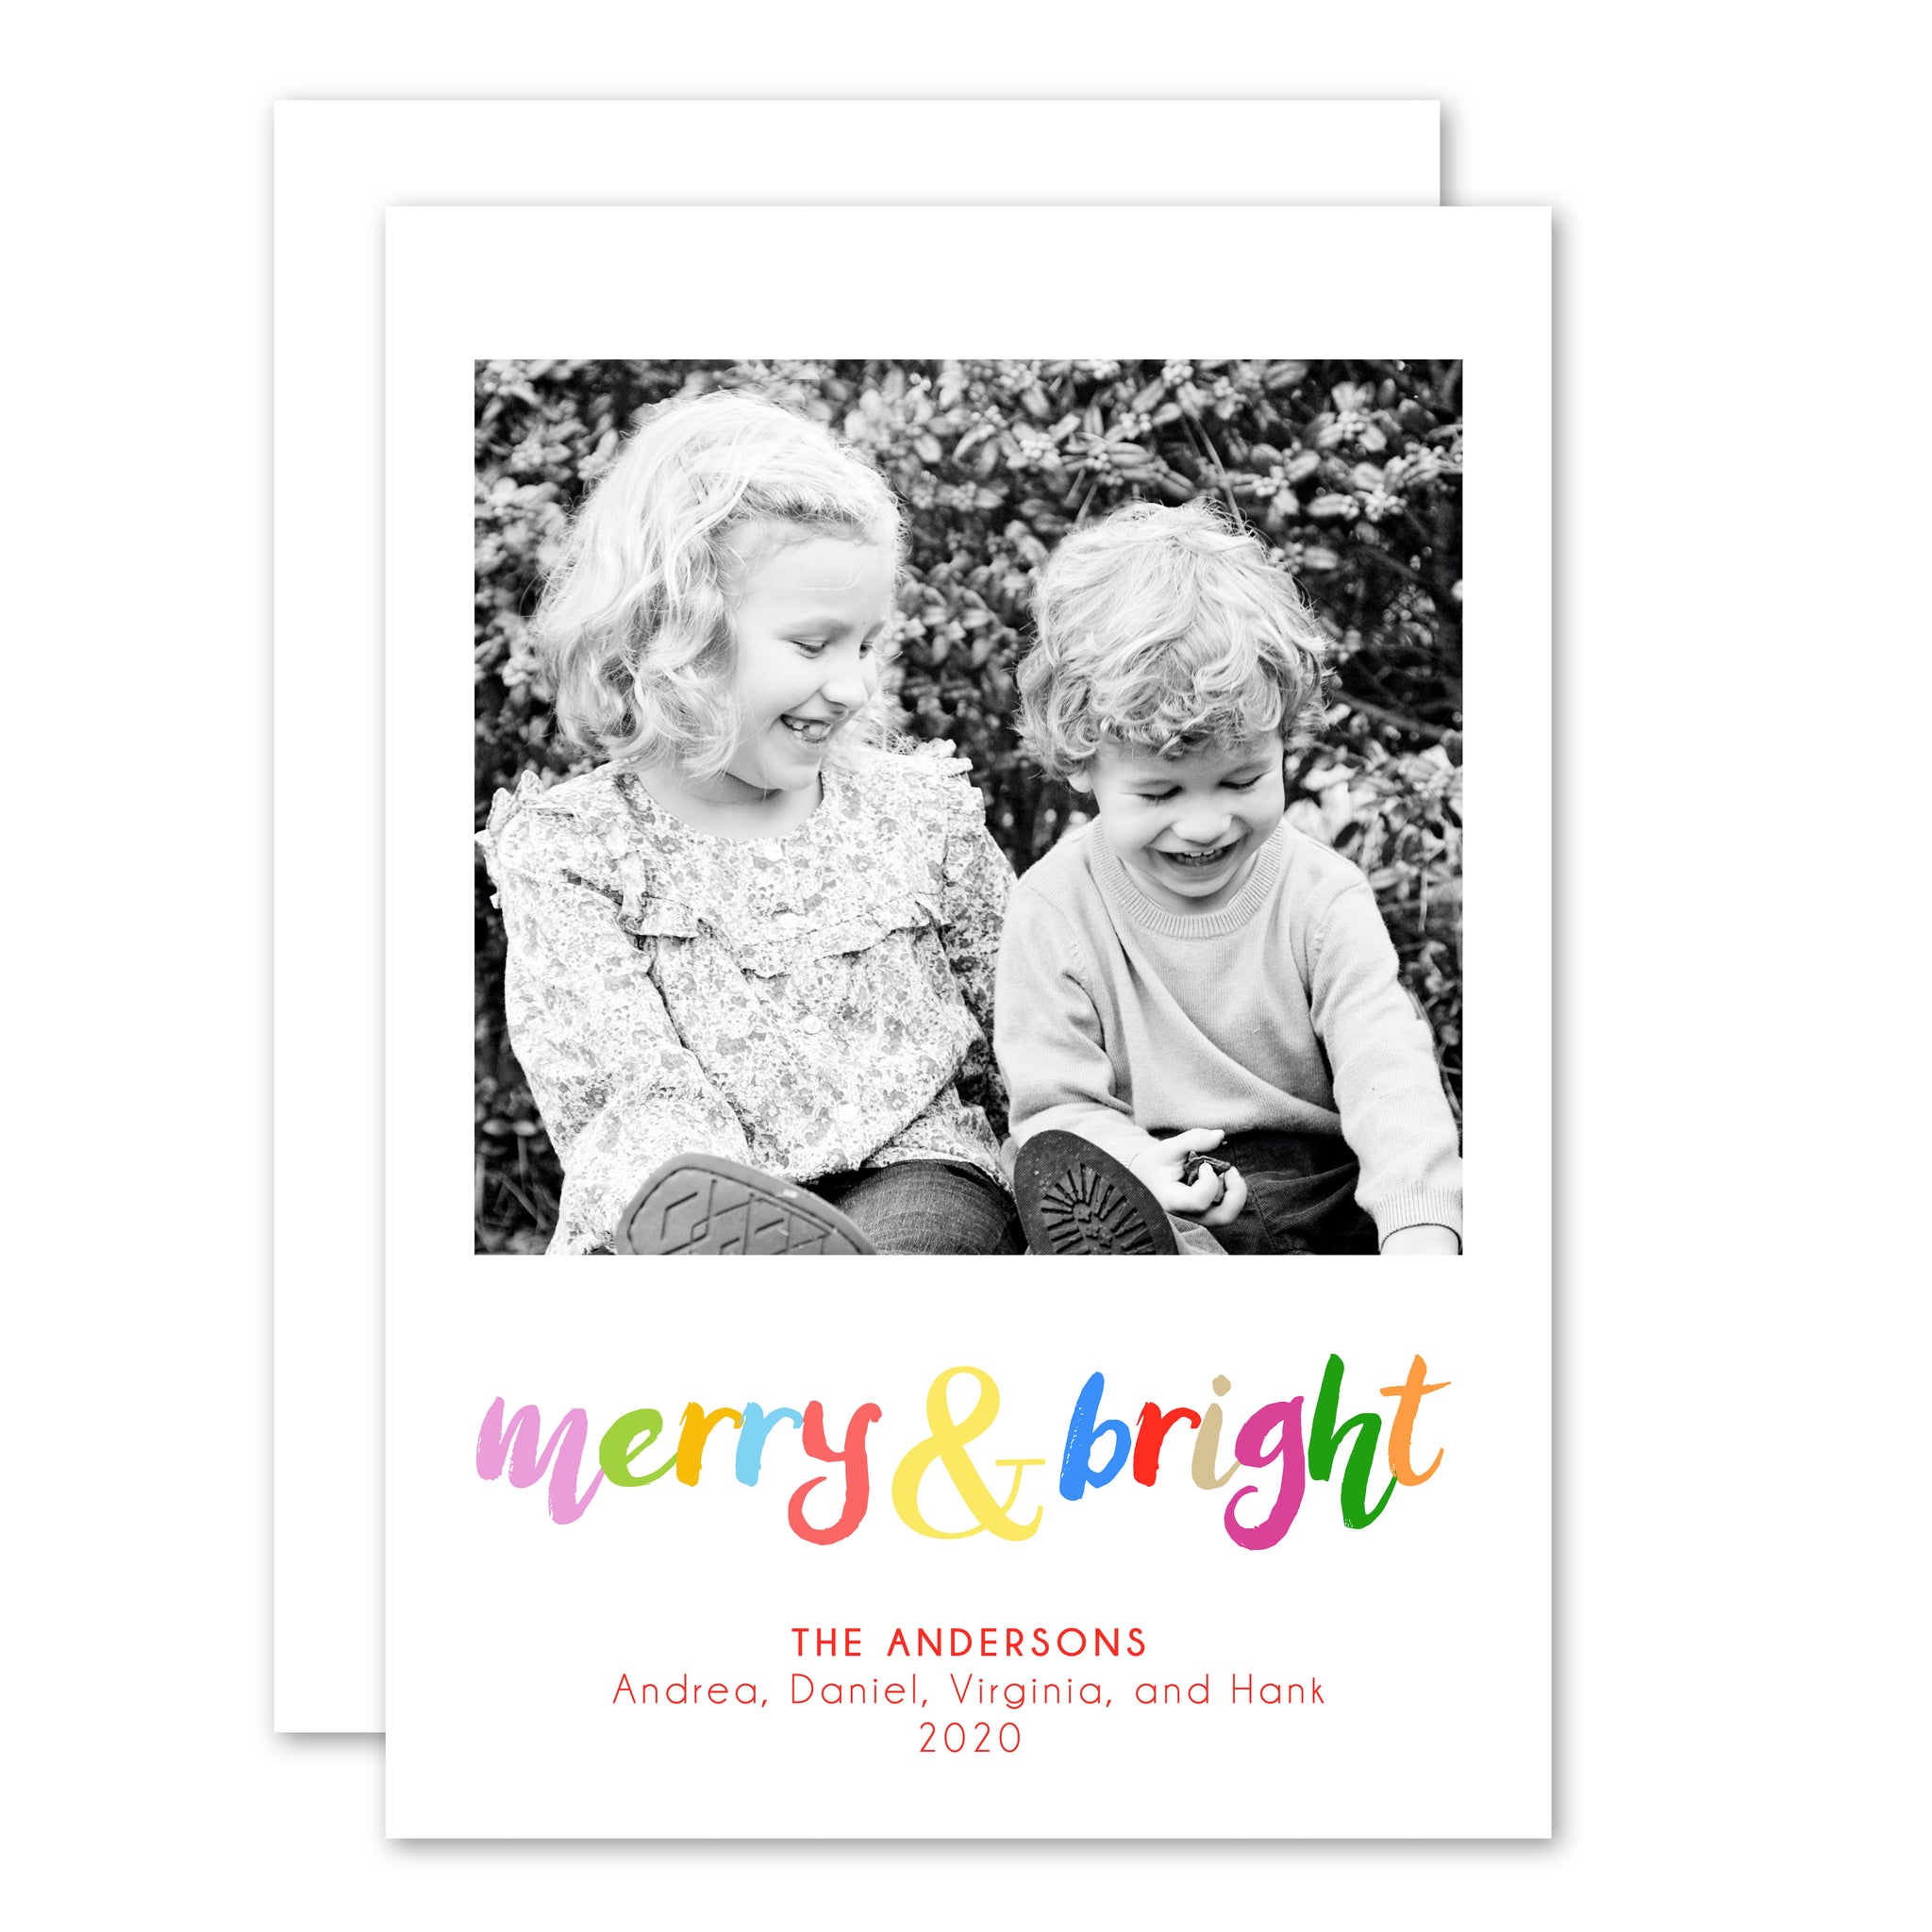 Colorful Merry & Bright Holiday Card